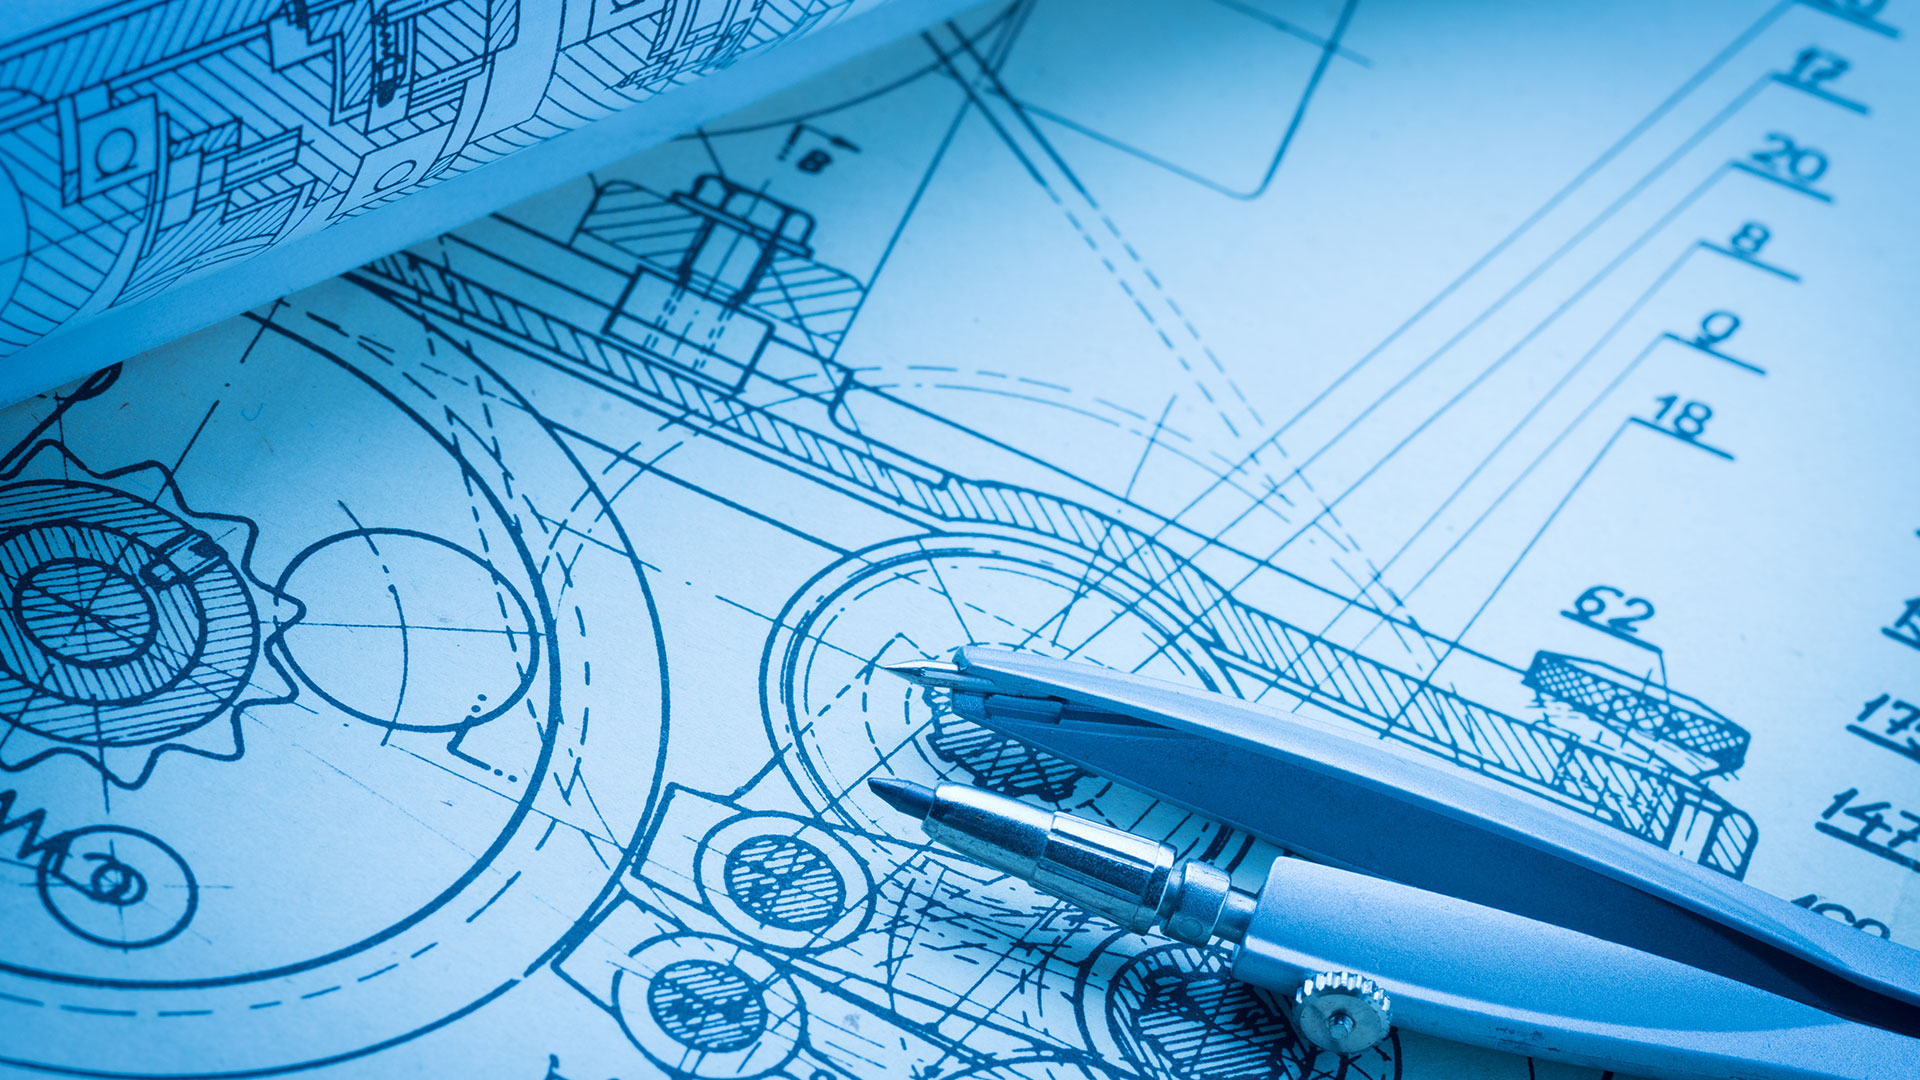 Engineering Drawing - Overview of the basics and applications